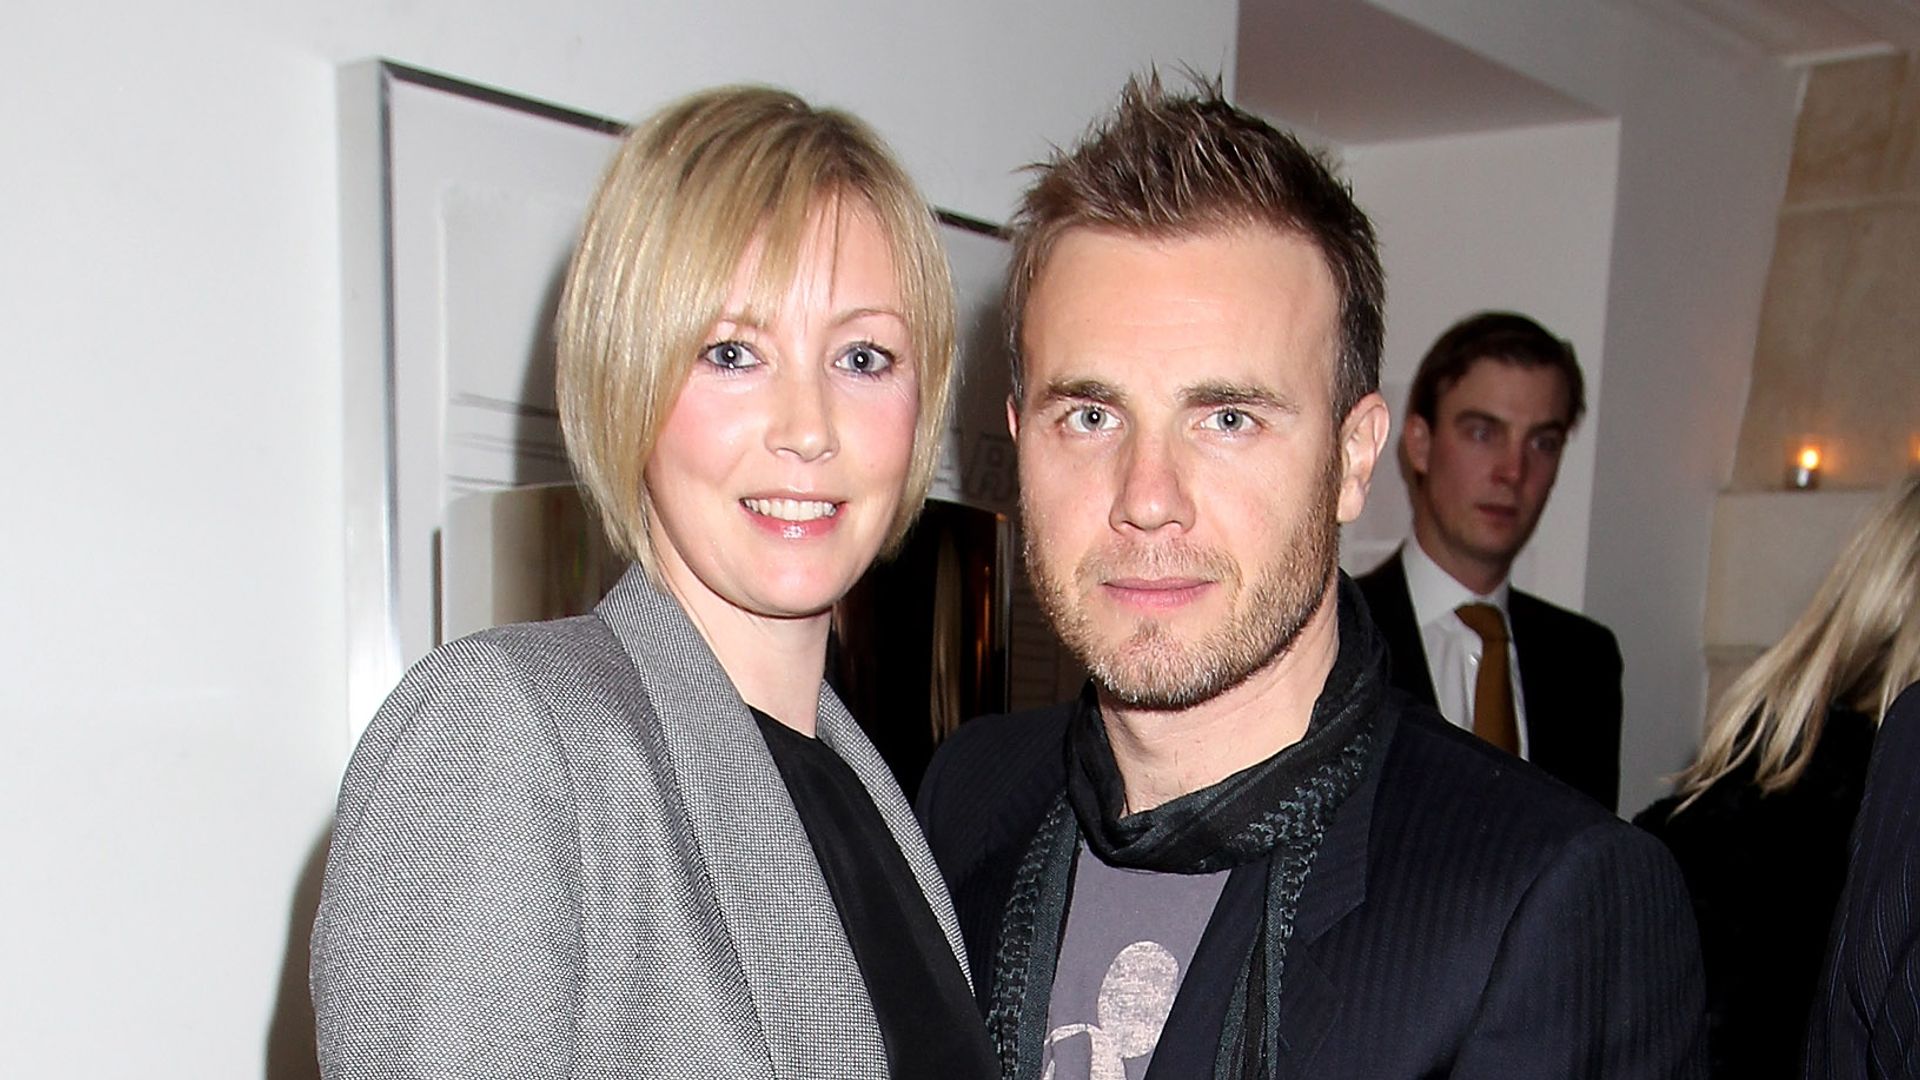 Gary Barlow and wife Dawn smiling at an event together 